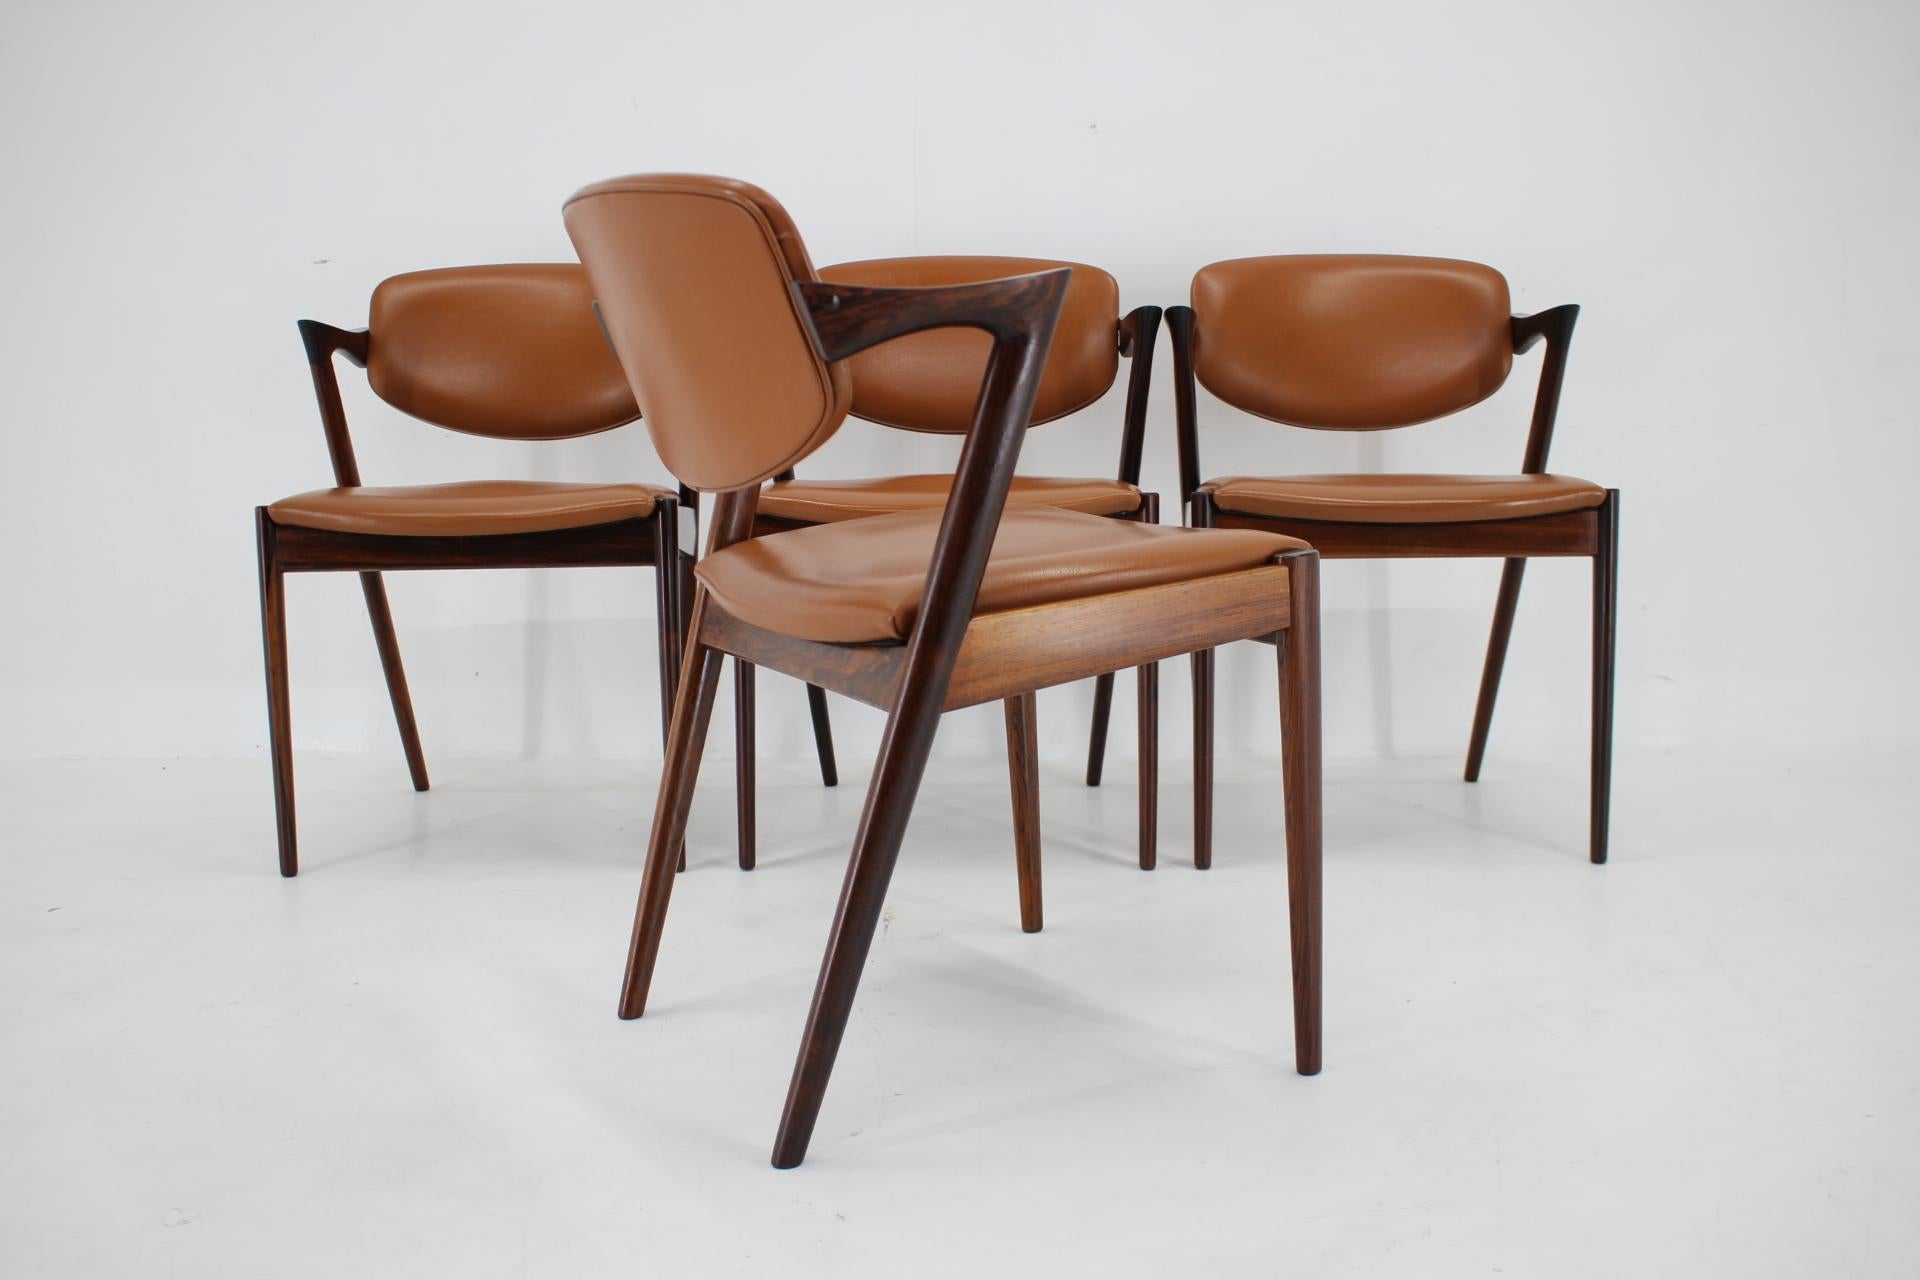 1960s Kai Kristiansen Model 42 Dining Chairs in Palisander, set of 4 For Sale 3